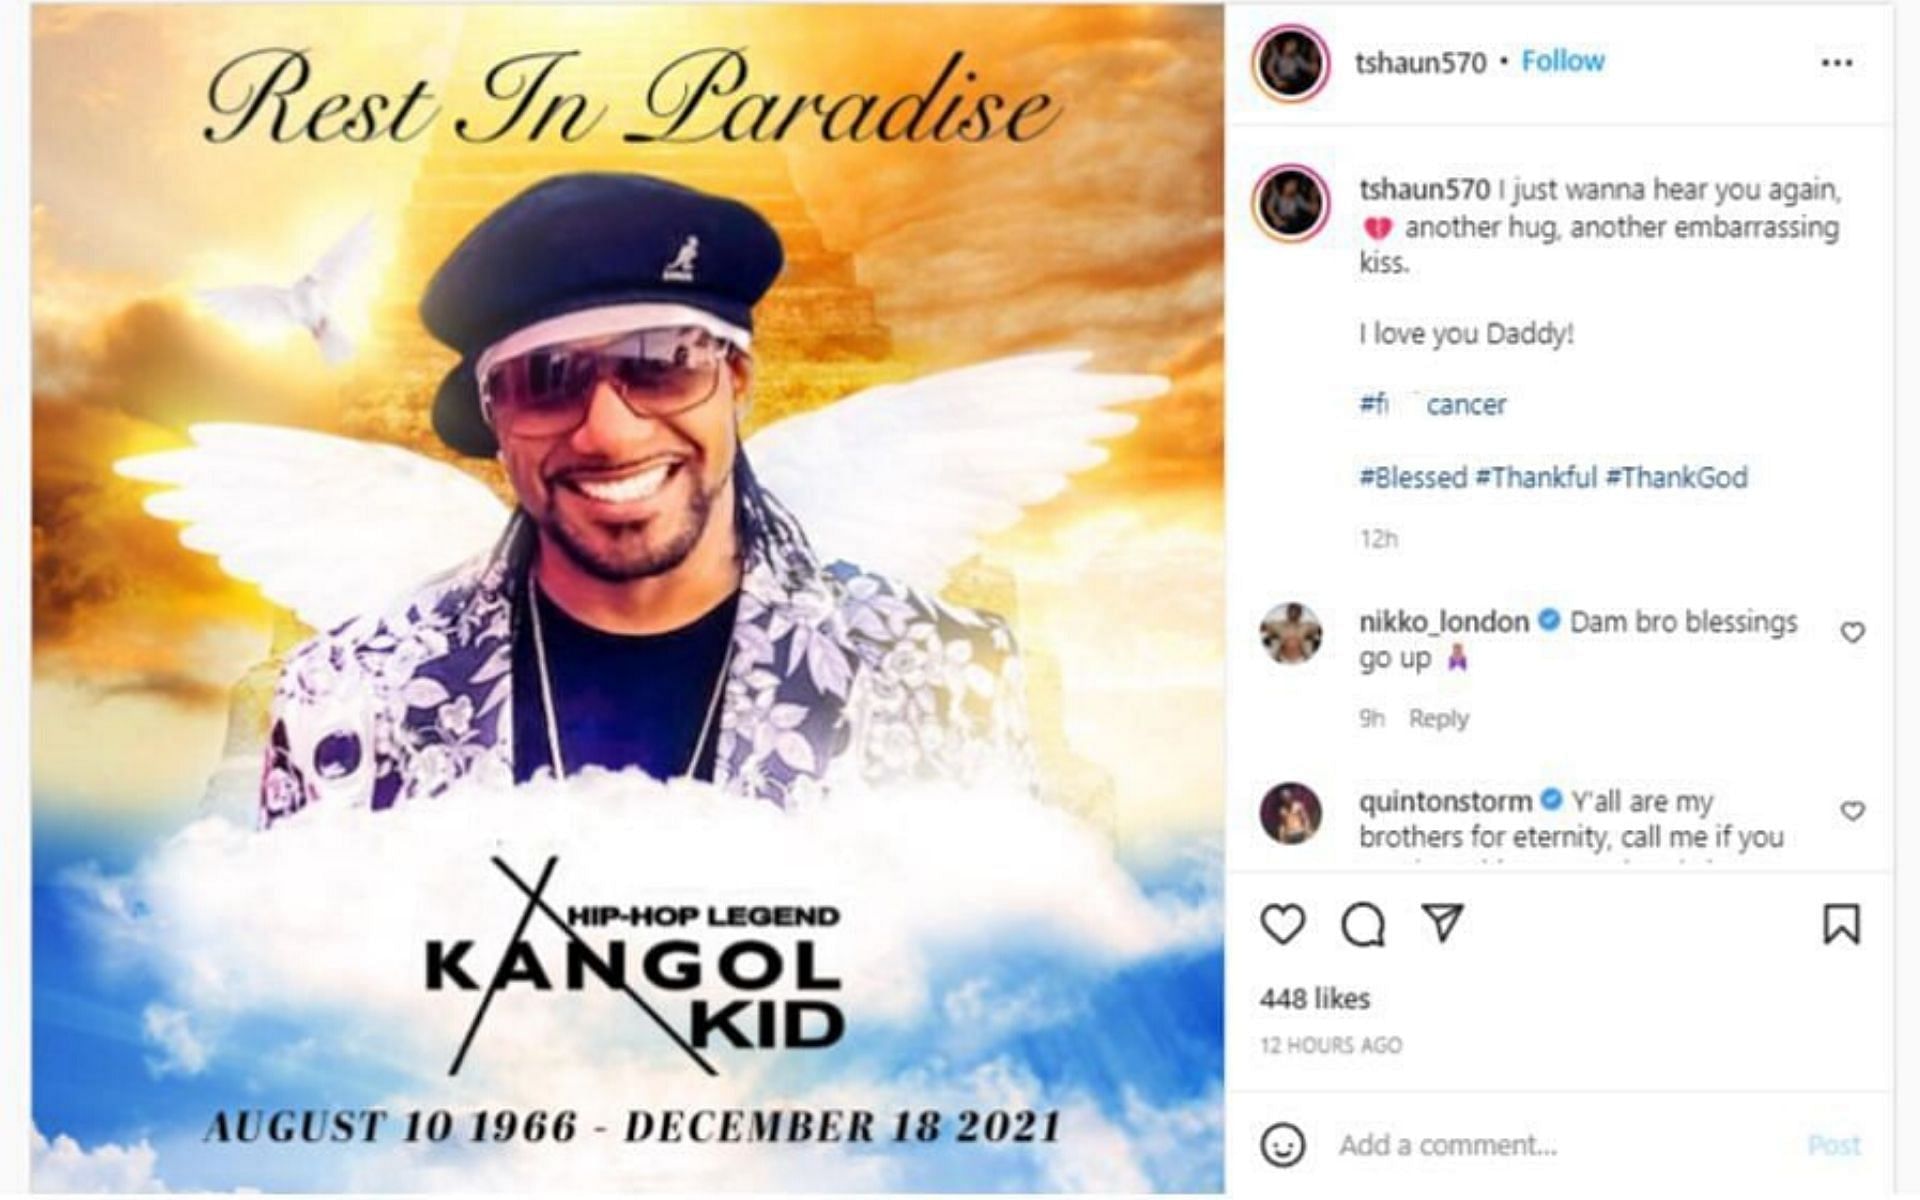 T.Shaun Fequiere&#039;s post about his father Kangol Kid&#039;s demise (Image via tshaun570/Instagram)